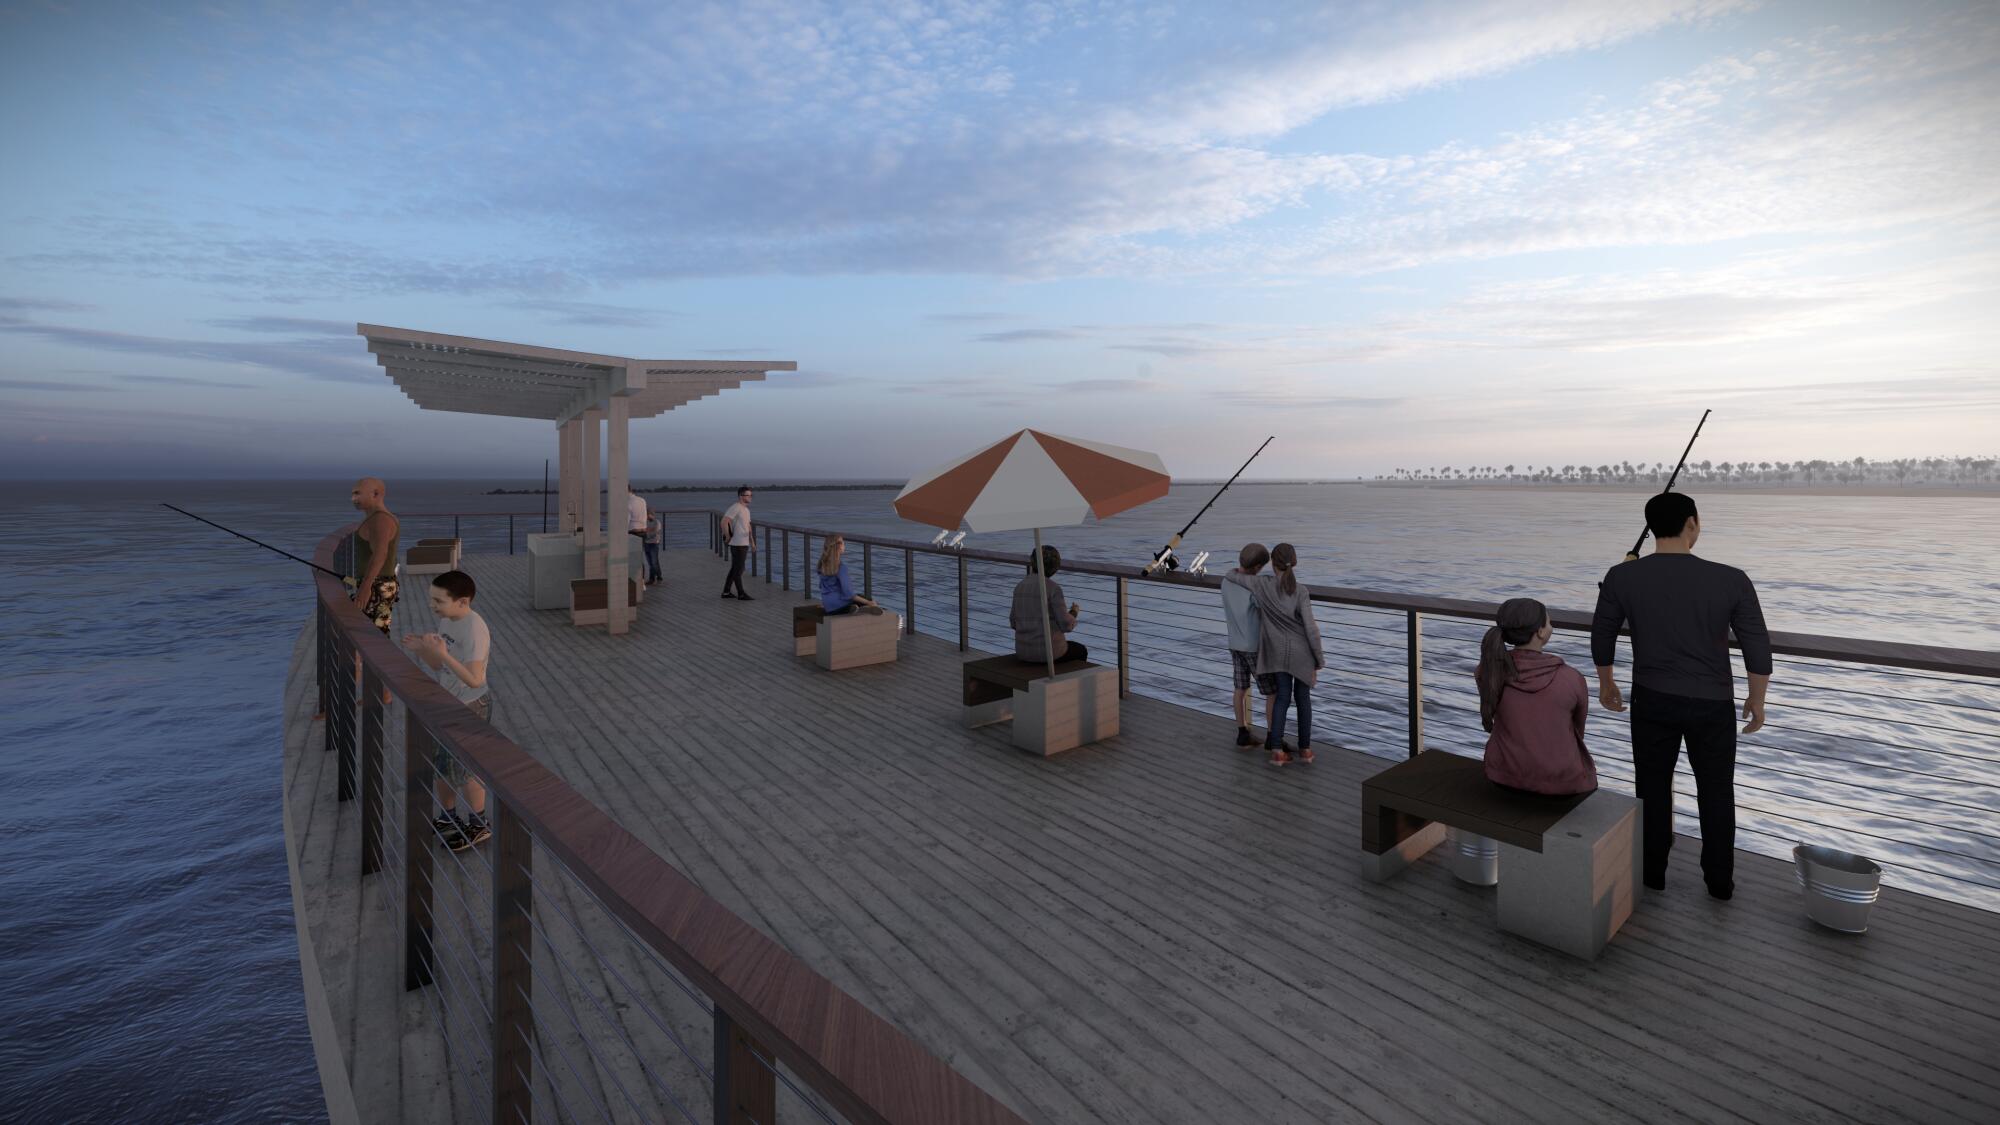 The proposed design incorporates community requests for space for fishing.